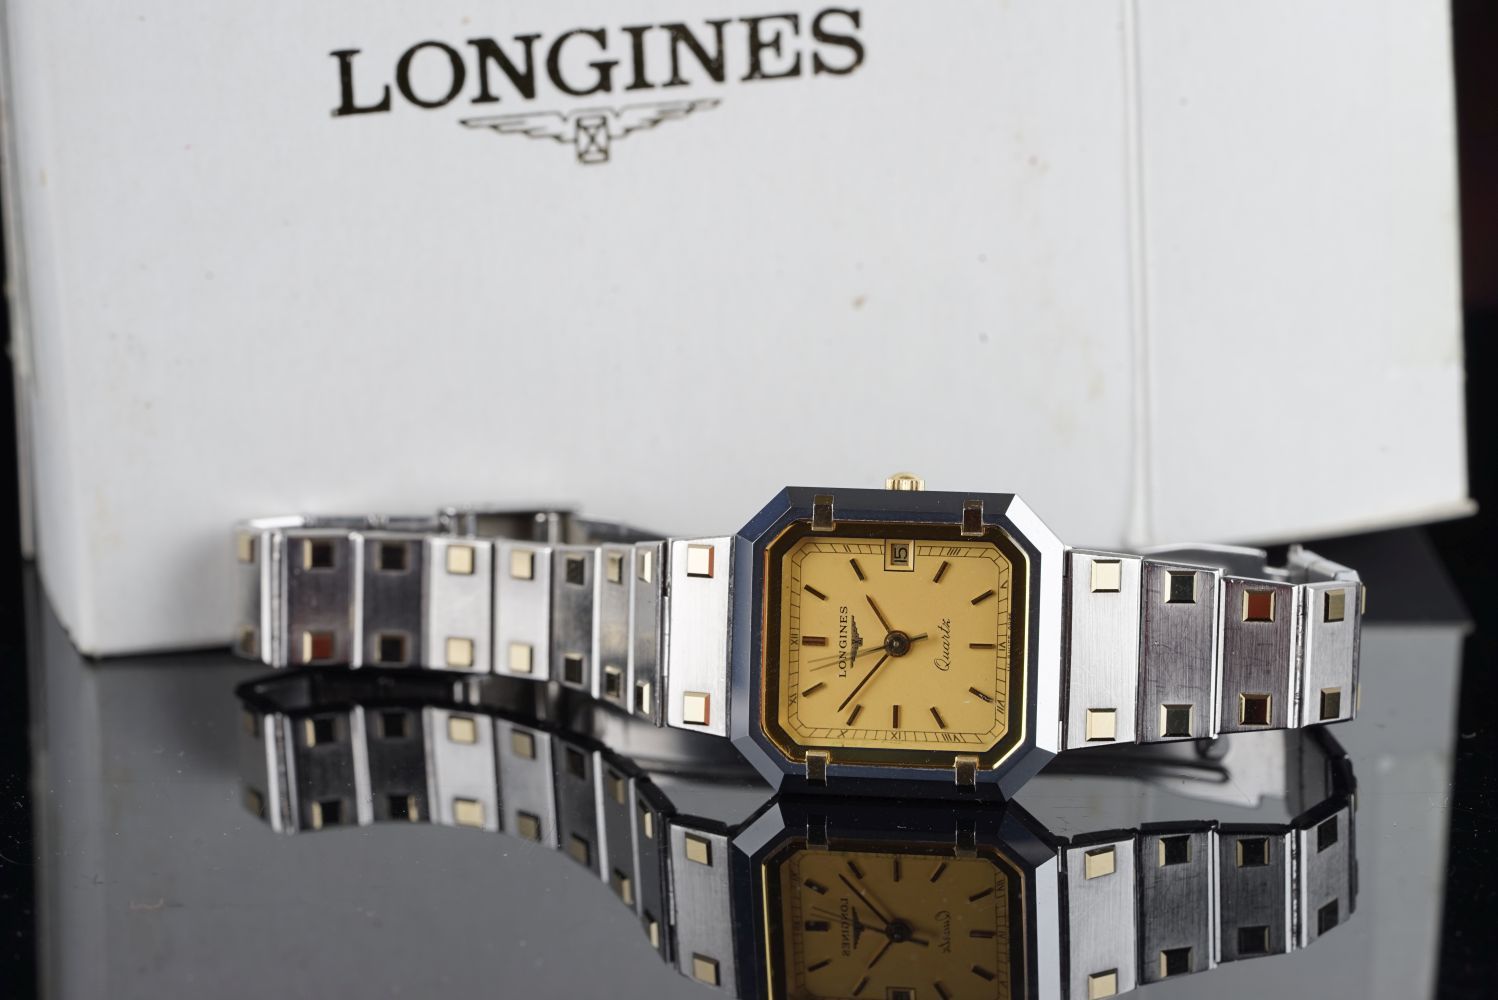 LADIES LONGINES XL 24 WRISTWATCH, rectangular gold dial with gold hour markers and hands, gold bezel - Image 2 of 2